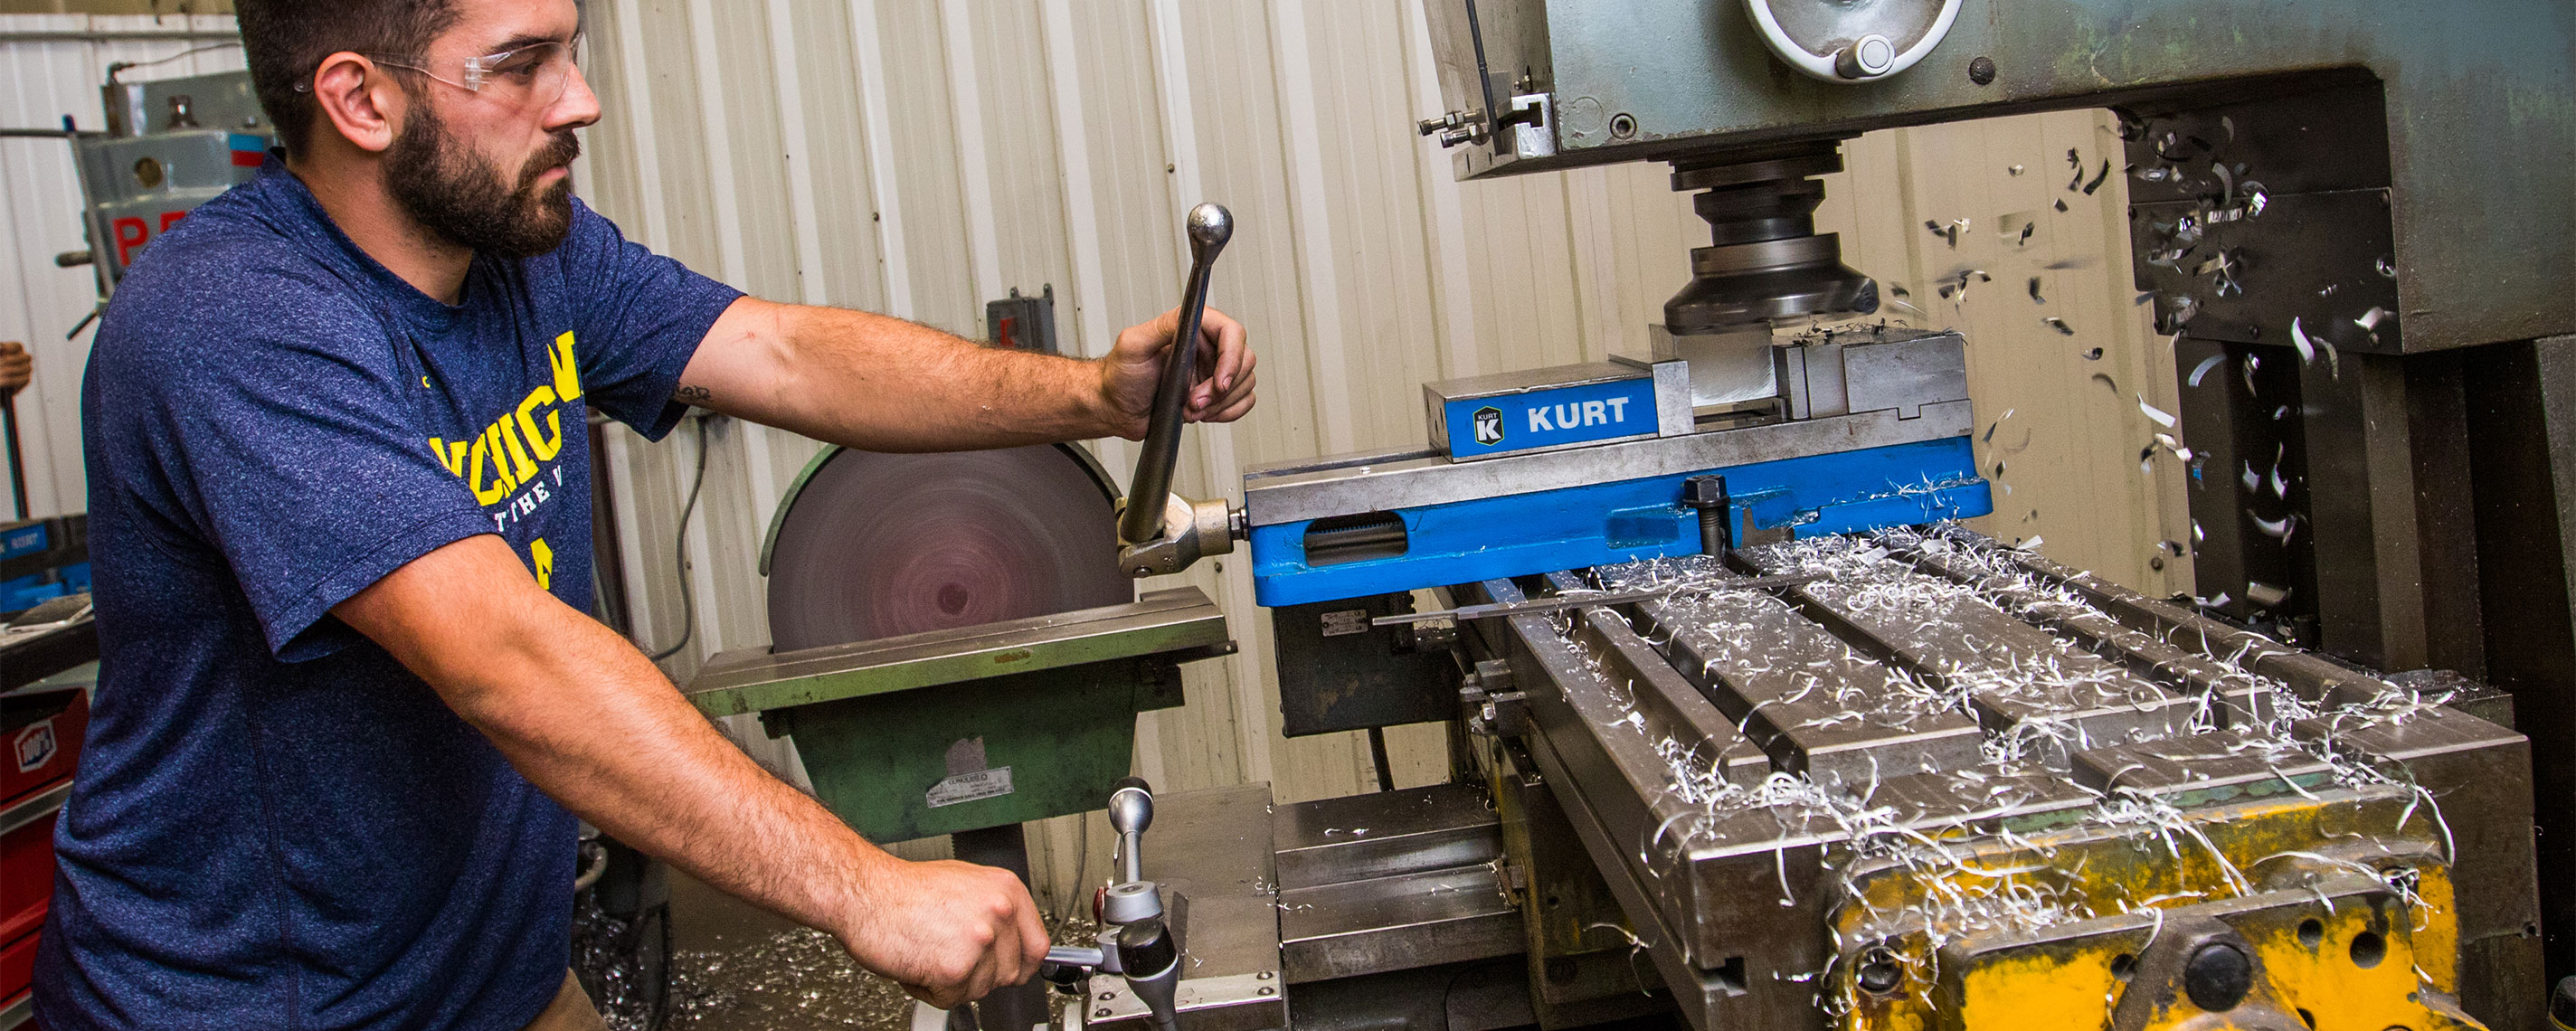 Header image showing Aggressive Tooling employee using a machine to cut metal